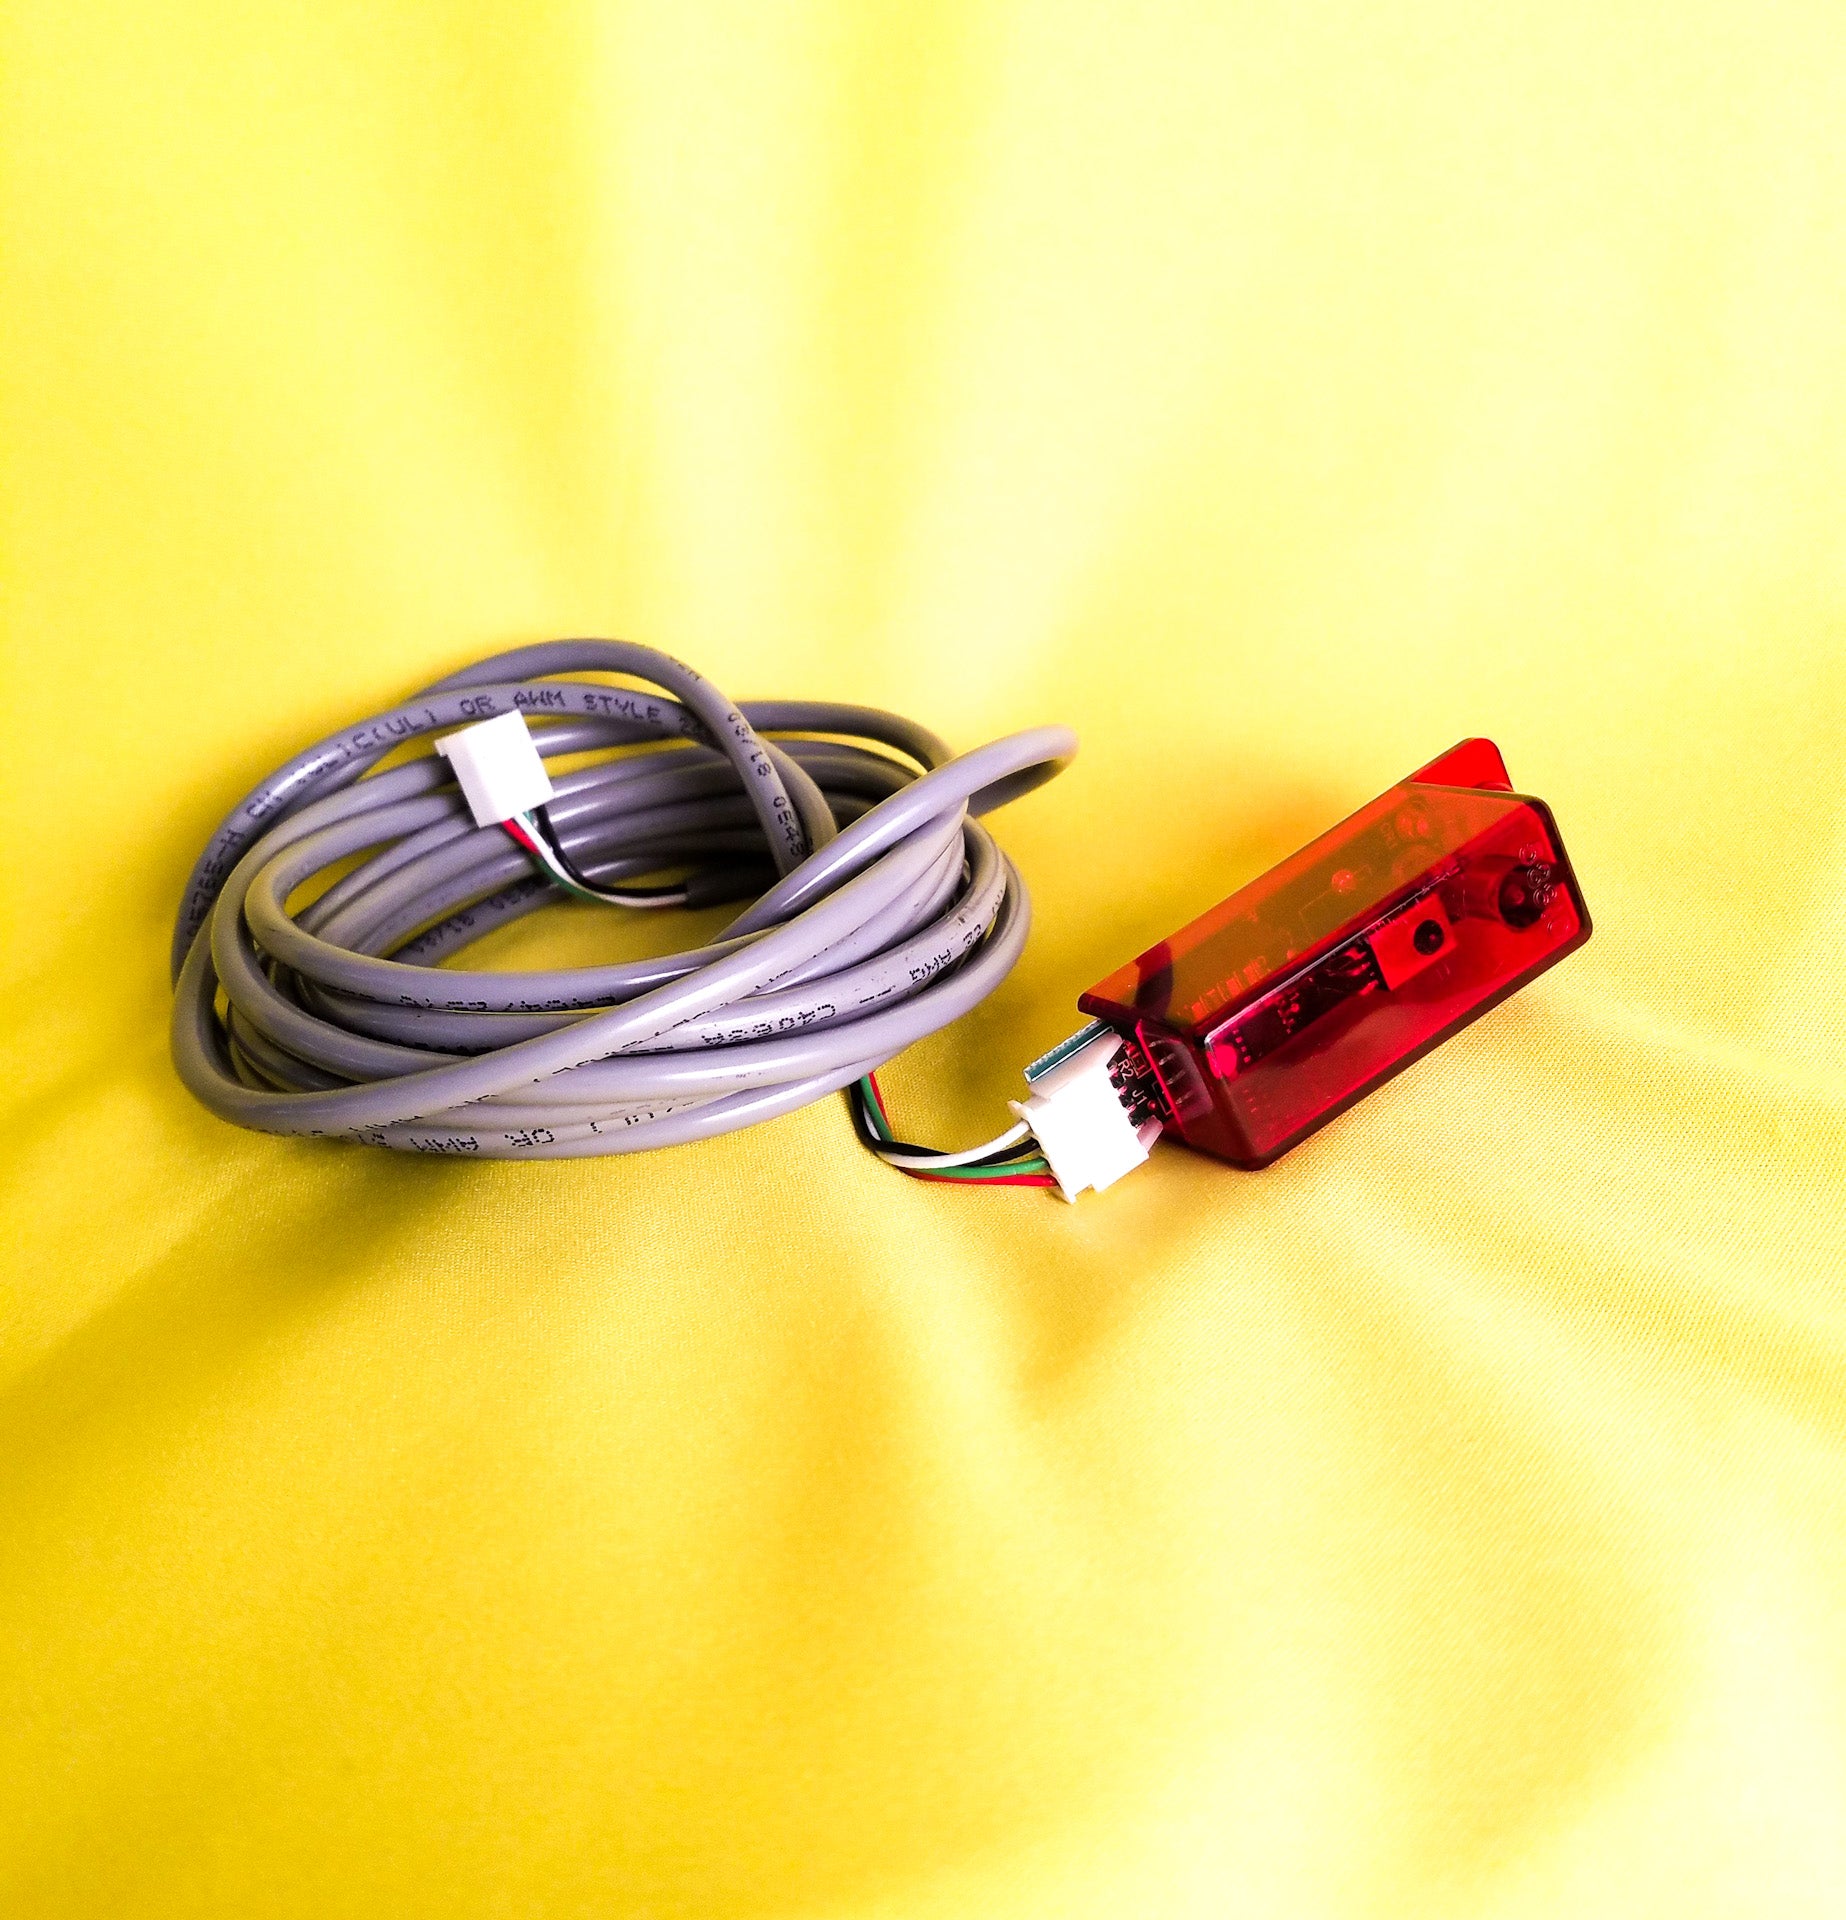 Rock-Ola I.R. Detector and Cable (58816-1A)